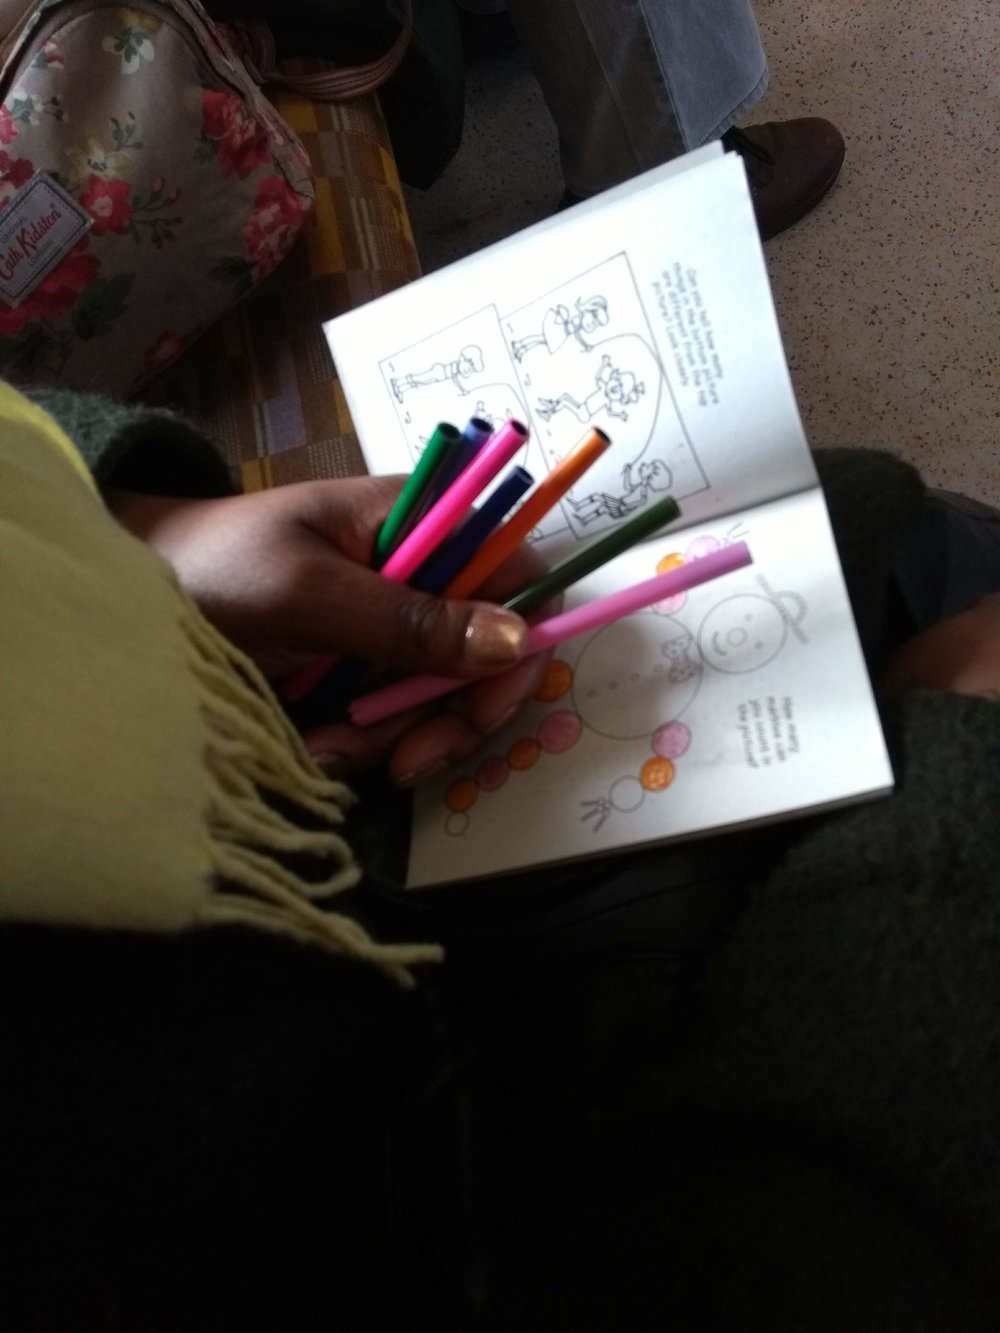  Colouring in can help lower stress levels on a commute 